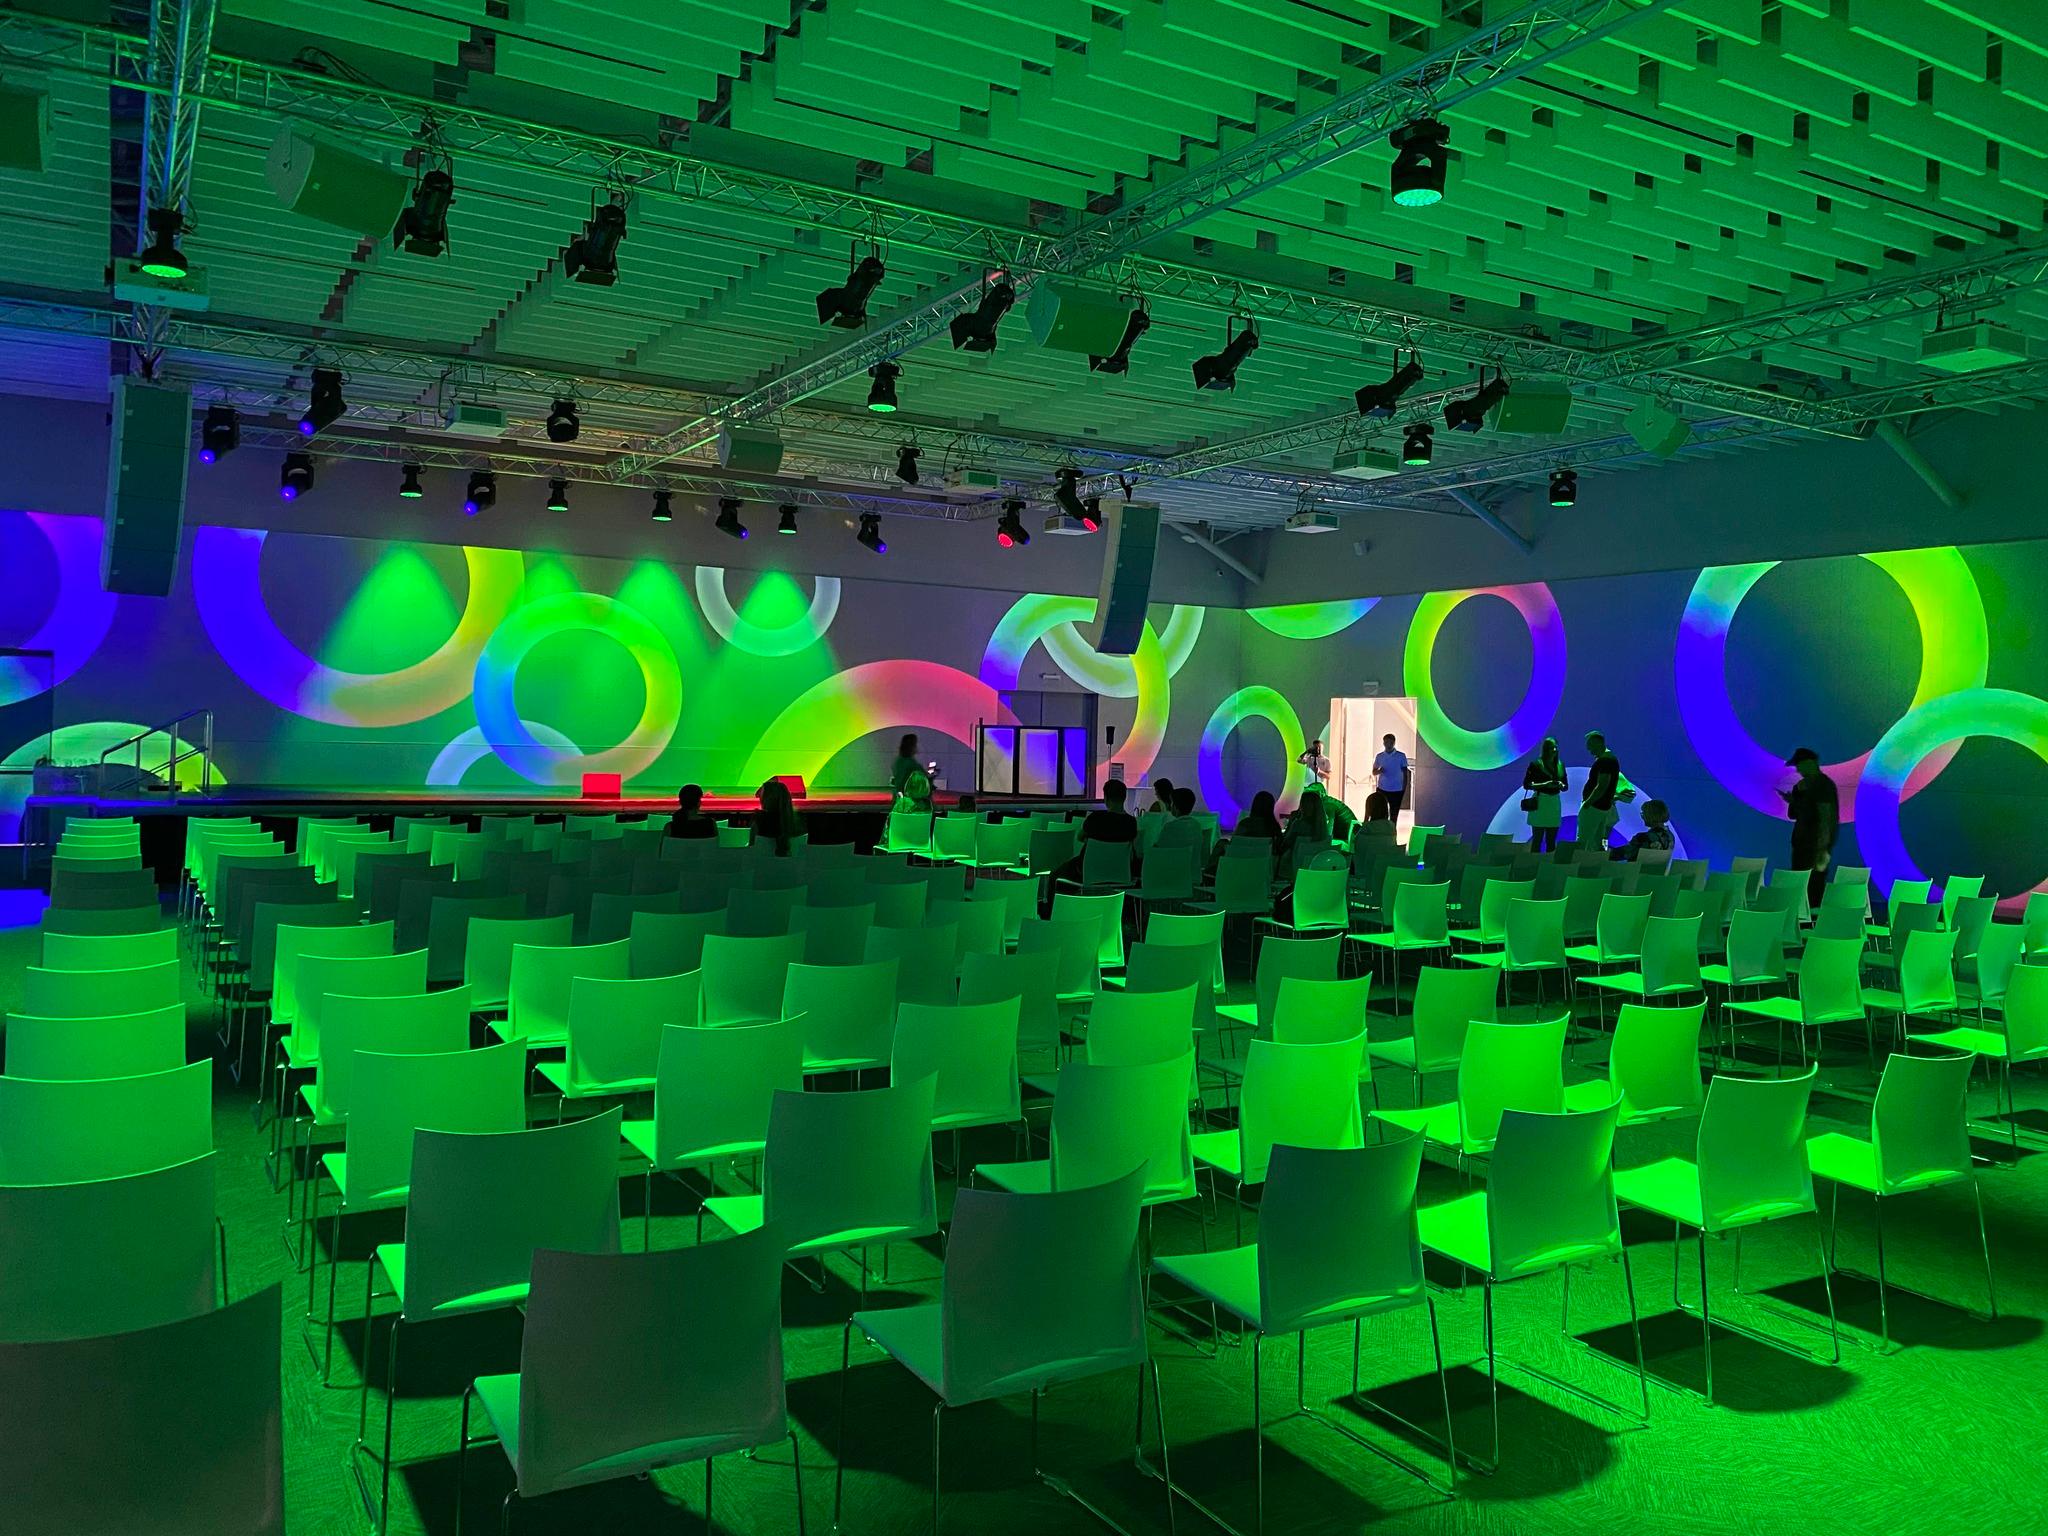 An event venue with bright panoramic projection driven by a Screenberry media server